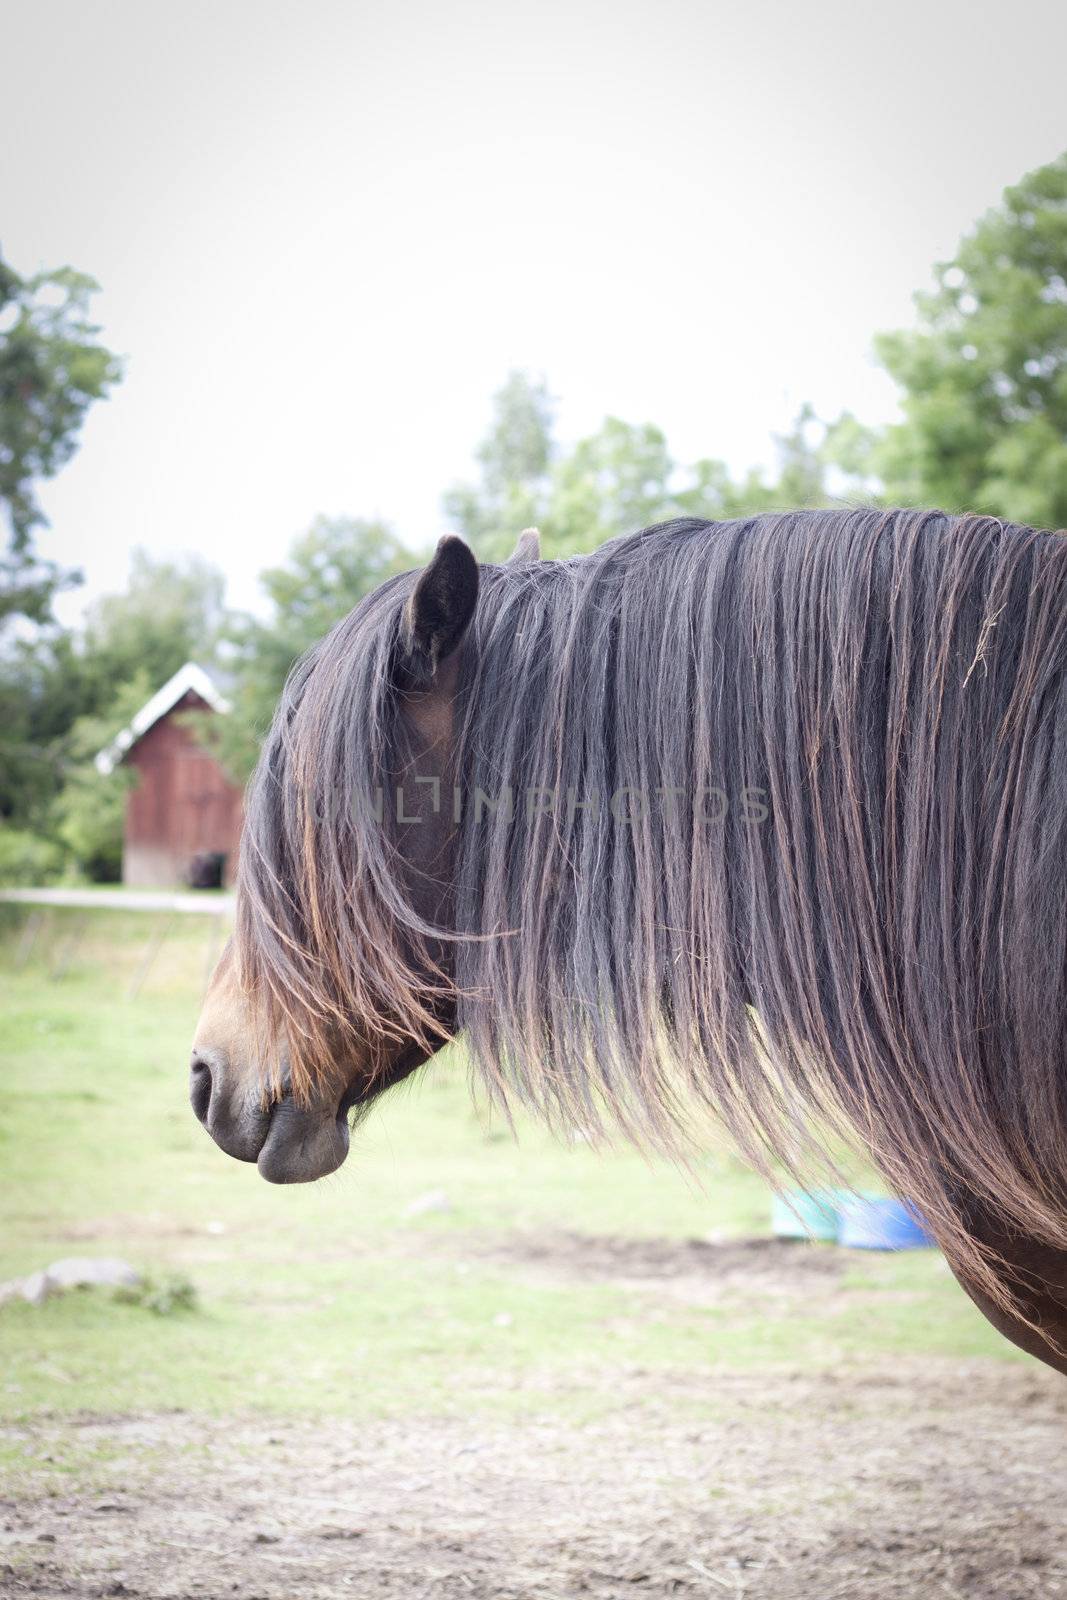 Vertical photo of a horse with long mane